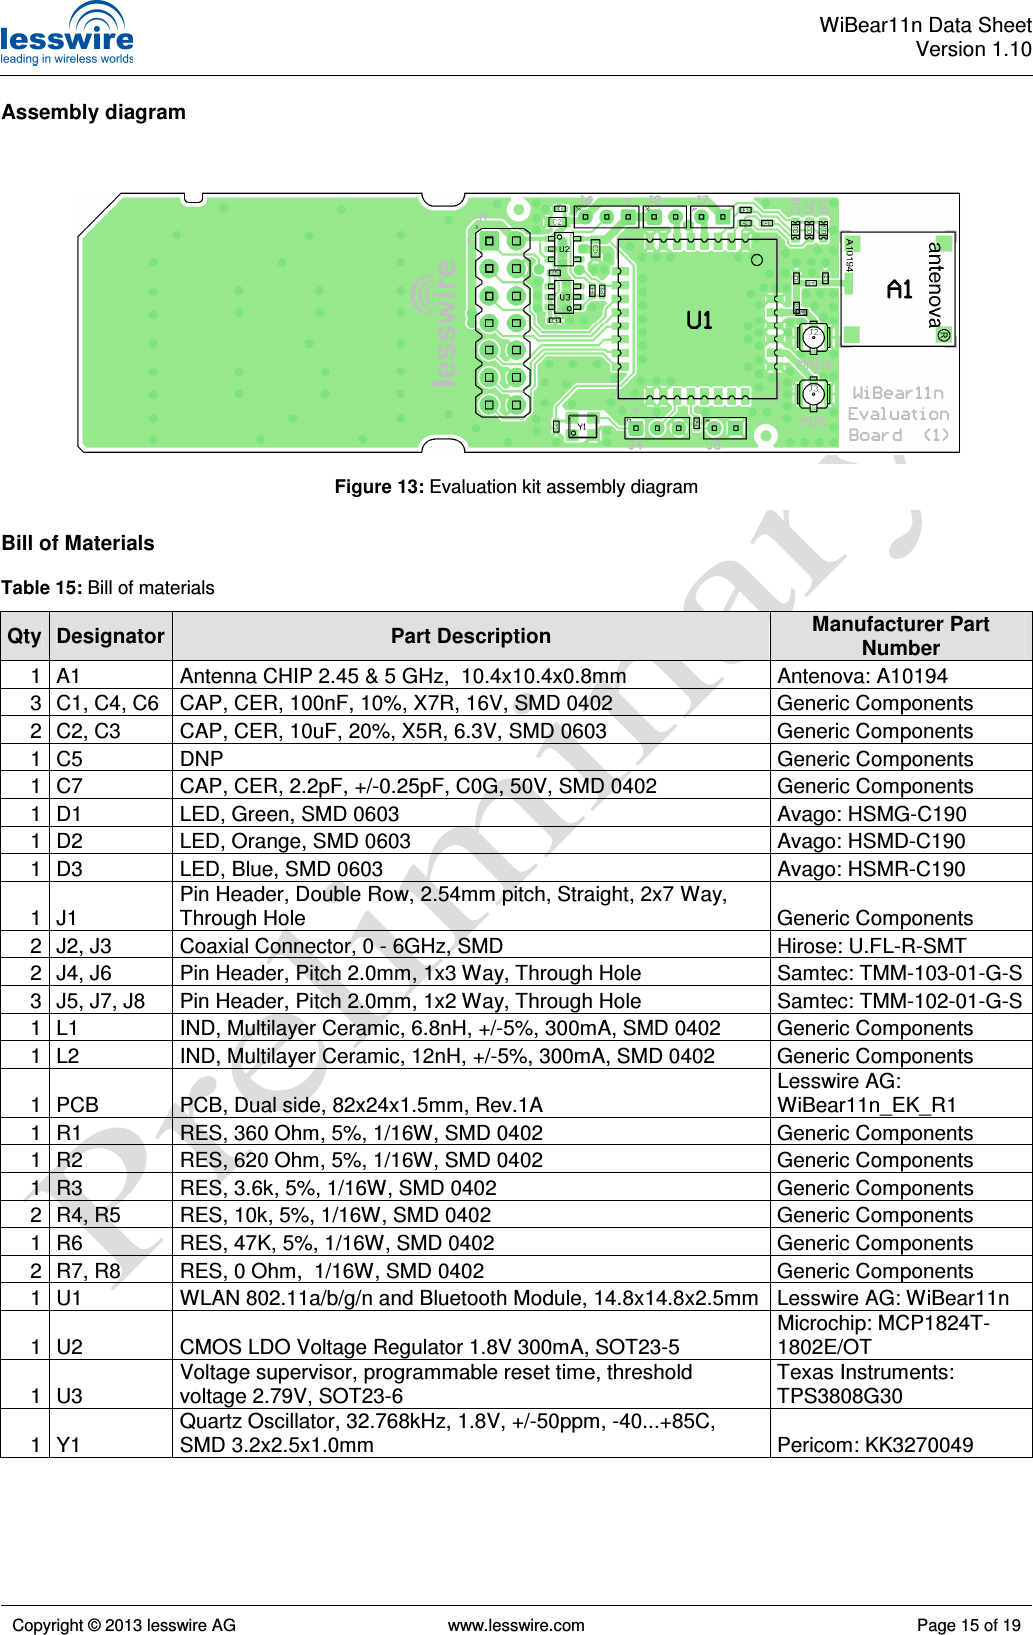  WiBear11n Data SheetVersion 1.10   Copyright © 2013 lesswire AG   www.lesswire.com  Page 15 of 19  Assembly diagram                  Bill of Materials  Table 15: Bill of materials Qty Designator Part Description  Manufacturer Part Number 1 A1  Antenna CHIP 2.45 &amp; 5 GHz,  10.4x10.4x0.8mm  Antenova: A10194 3 C1, C4, C6  CAP, CER, 100nF, 10%, X7R, 16V, SMD 0402  Generic Components 2 C2, C3  CAP, CER, 10uF, 20%, X5R, 6.3V, SMD 0603  Generic Components 1 C5  DNP  Generic Components 1 C7  CAP, CER, 2.2pF, +/-0.25pF, C0G, 50V, SMD 0402  Generic Components 1 D1  LED, Green, SMD 0603  Avago: HSMG-C190 1 D2  LED, Orange, SMD 0603  Avago: HSMD-C190 1 D3  LED, Blue, SMD 0603  Avago: HSMR-C190 1 J1 Pin Header, Double Row, 2.54mm pitch, Straight, 2x7 Way, Through Hole  Generic Components 2 J2, J3  Coaxial Connector, 0 - 6GHz, SMD  Hirose: U.FL-R-SMT 2 J4, J6  Pin Header, Pitch 2.0mm, 1x3 Way, Through Hole  Samtec: TMM-103-01-G-S 3 J5, J7, J8  Pin Header, Pitch 2.0mm, 1x2 Way, Through Hole  Samtec: TMM-102-01-G-S 1 L1  IND, Multilayer Ceramic, 6.8nH, +/-5%, 300mA, SMD 0402  Generic Components 1 L2  IND, Multilayer Ceramic, 12nH, +/-5%, 300mA, SMD 0402  Generic Components 1 PCB  PCB, Dual side, 82x24x1.5mm, Rev.1A Lesswire AG: WiBear11n_EK_R1 1 R1  RES, 360 Ohm, 5%, 1/16W, SMD 0402  Generic Components 1 R2  RES, 620 Ohm, 5%, 1/16W, SMD 0402  Generic Components 1 R3  RES, 3.6k, 5%, 1/16W, SMD 0402  Generic Components 2 R4, R5  RES, 10k, 5%, 1/16W, SMD 0402  Generic Components 1 R6  RES, 47K, 5%, 1/16W, SMD 0402  Generic Components 2 R7, R8  RES, 0 Ohm,  1/16W, SMD 0402  Generic Components 1 U1  WLAN 802.11a/b/g/n and Bluetooth Module, 14.8x14.8x2.5mm Lesswire AG: WiBear11n 1 U2  CMOS LDO Voltage Regulator 1.8V 300mA, SOT23-5 Microchip: MCP1824T-1802E/OT 1 U3 Voltage supervisor, programmable reset time, threshold voltage 2.79V, SOT23-6 Texas Instruments: TPS3808G30 1 Y1 Quartz Oscillator, 32.768kHz, 1.8V, +/-50ppm, -40...+85C, SMD 3.2x2.5x1.0mm  Pericom: KK3270049 Figure 13: Evaluation kit assembly diagram 